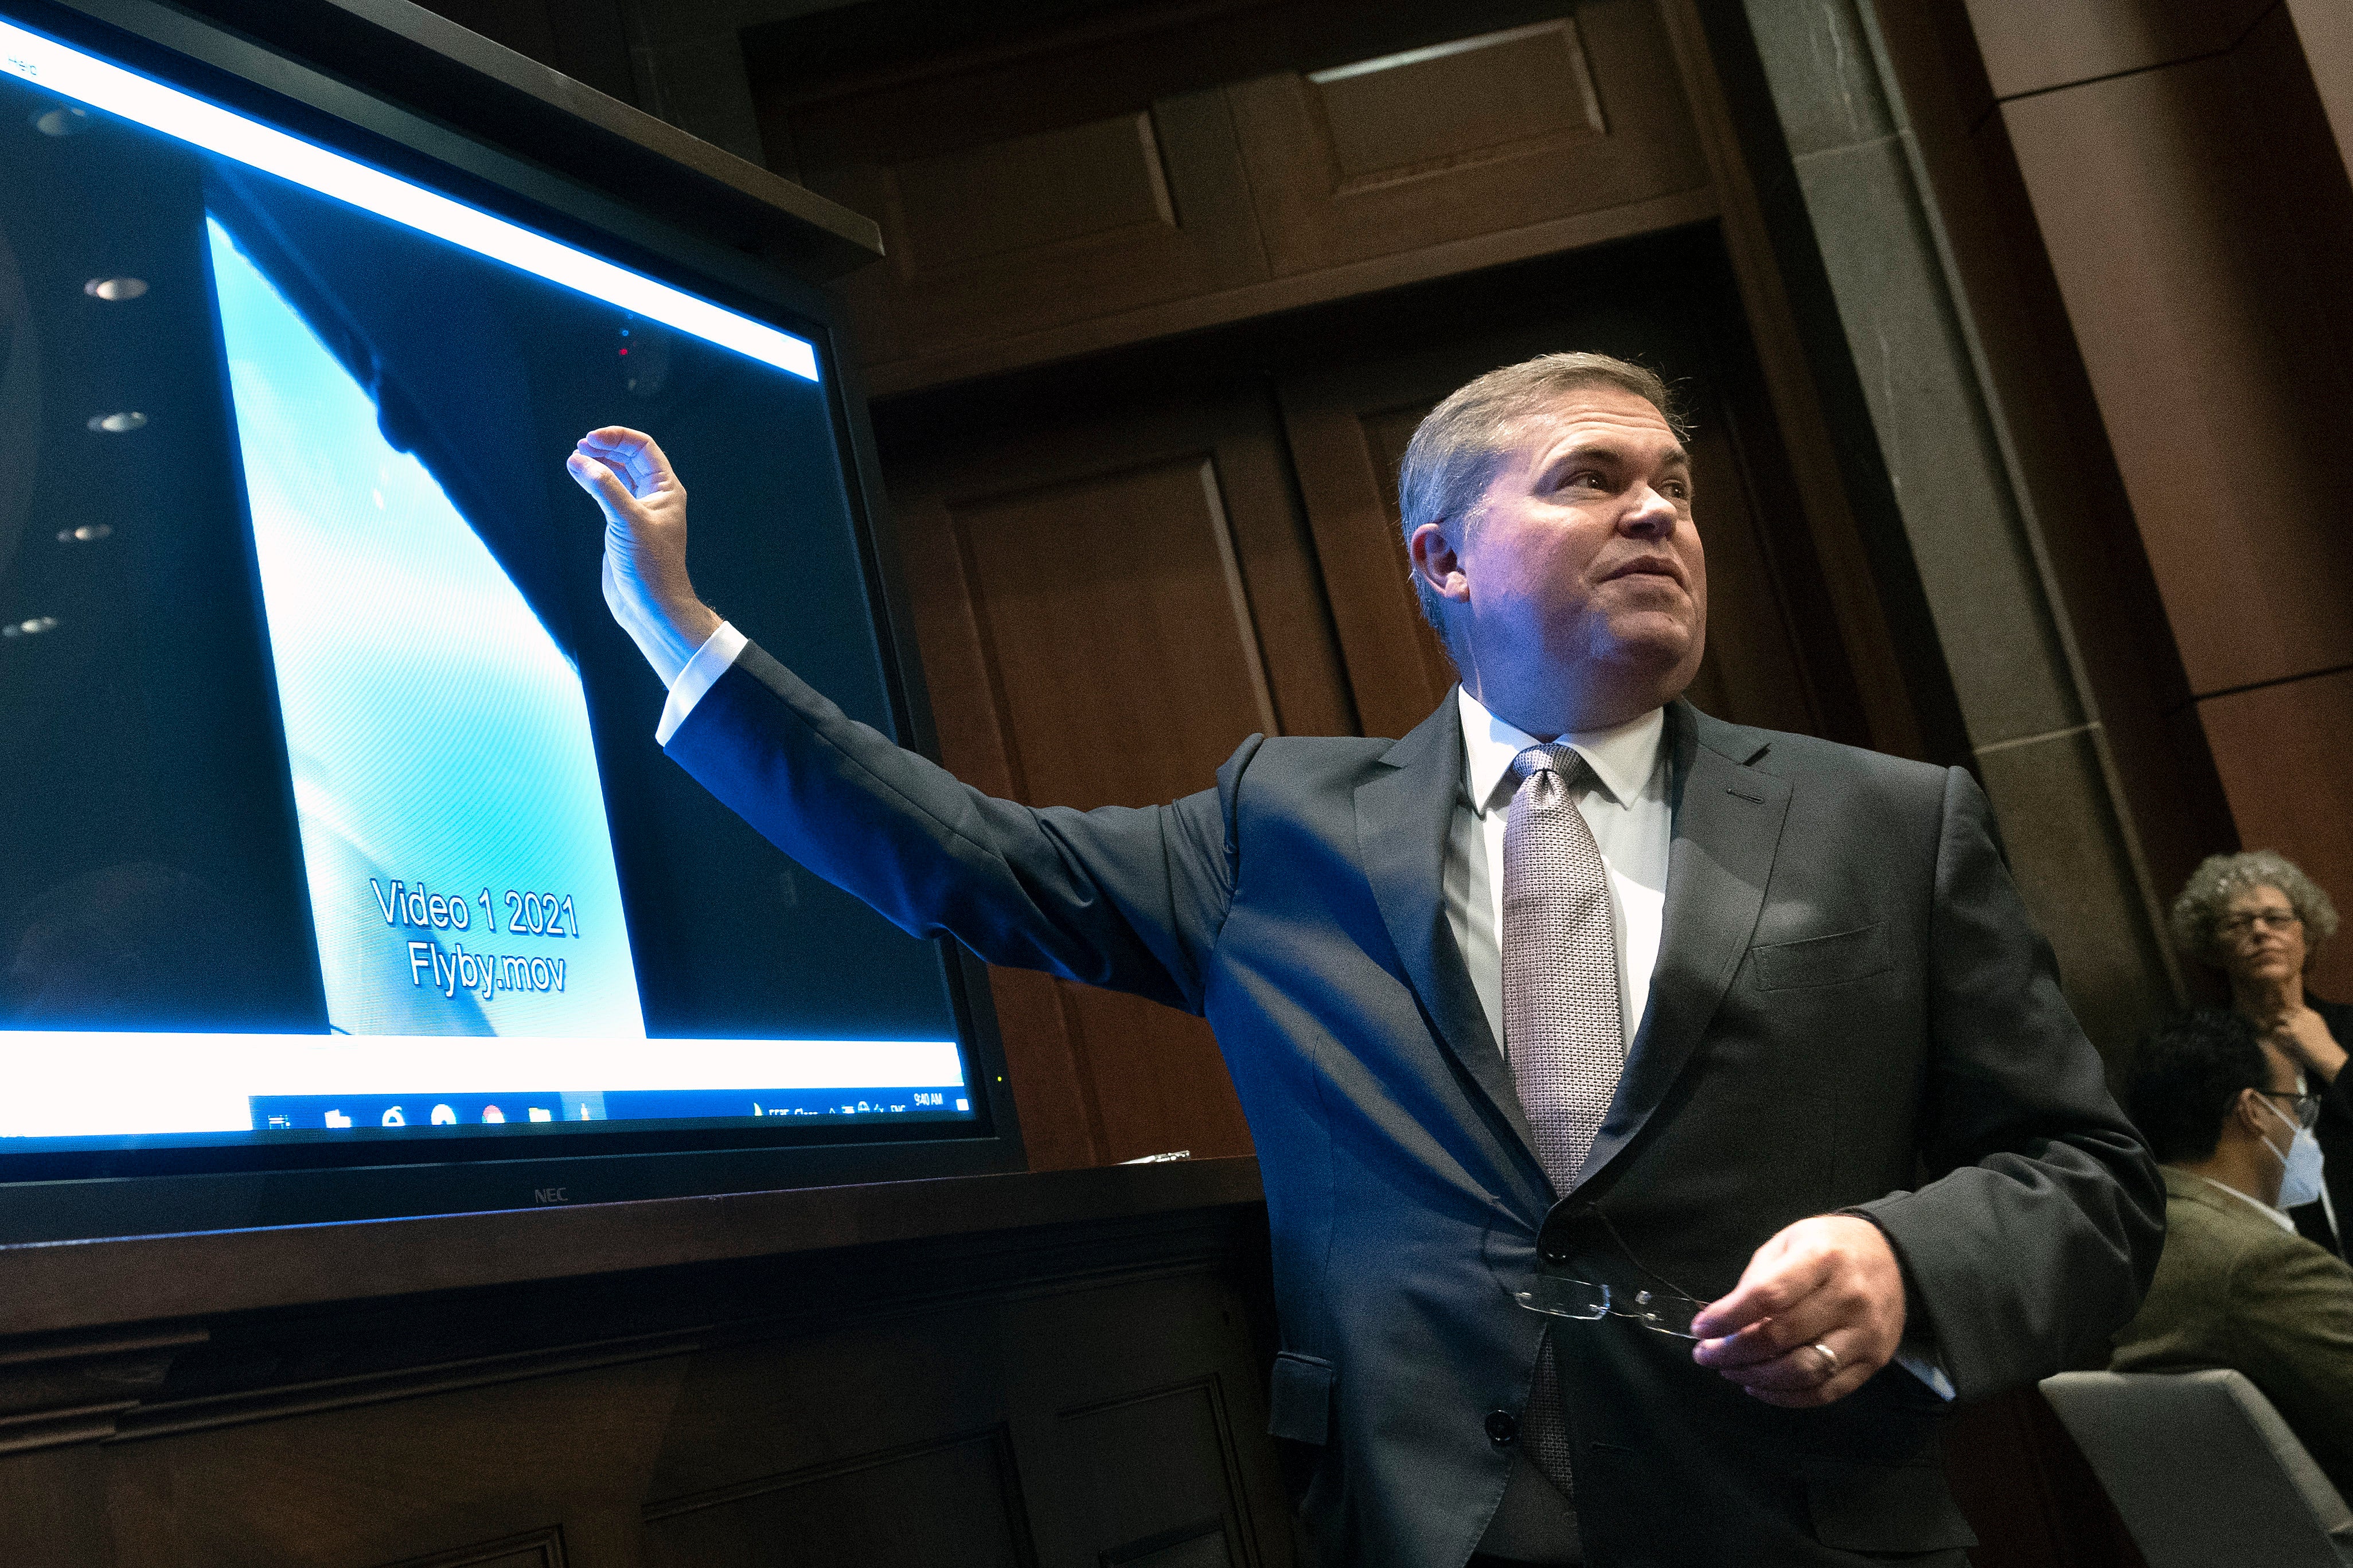 The U.S. Deputy Director of Naval Intelligence Scott Bray talks through a UAP video at a Congressional hearing. (Photo: Kevin Dietsch, Getty Images)